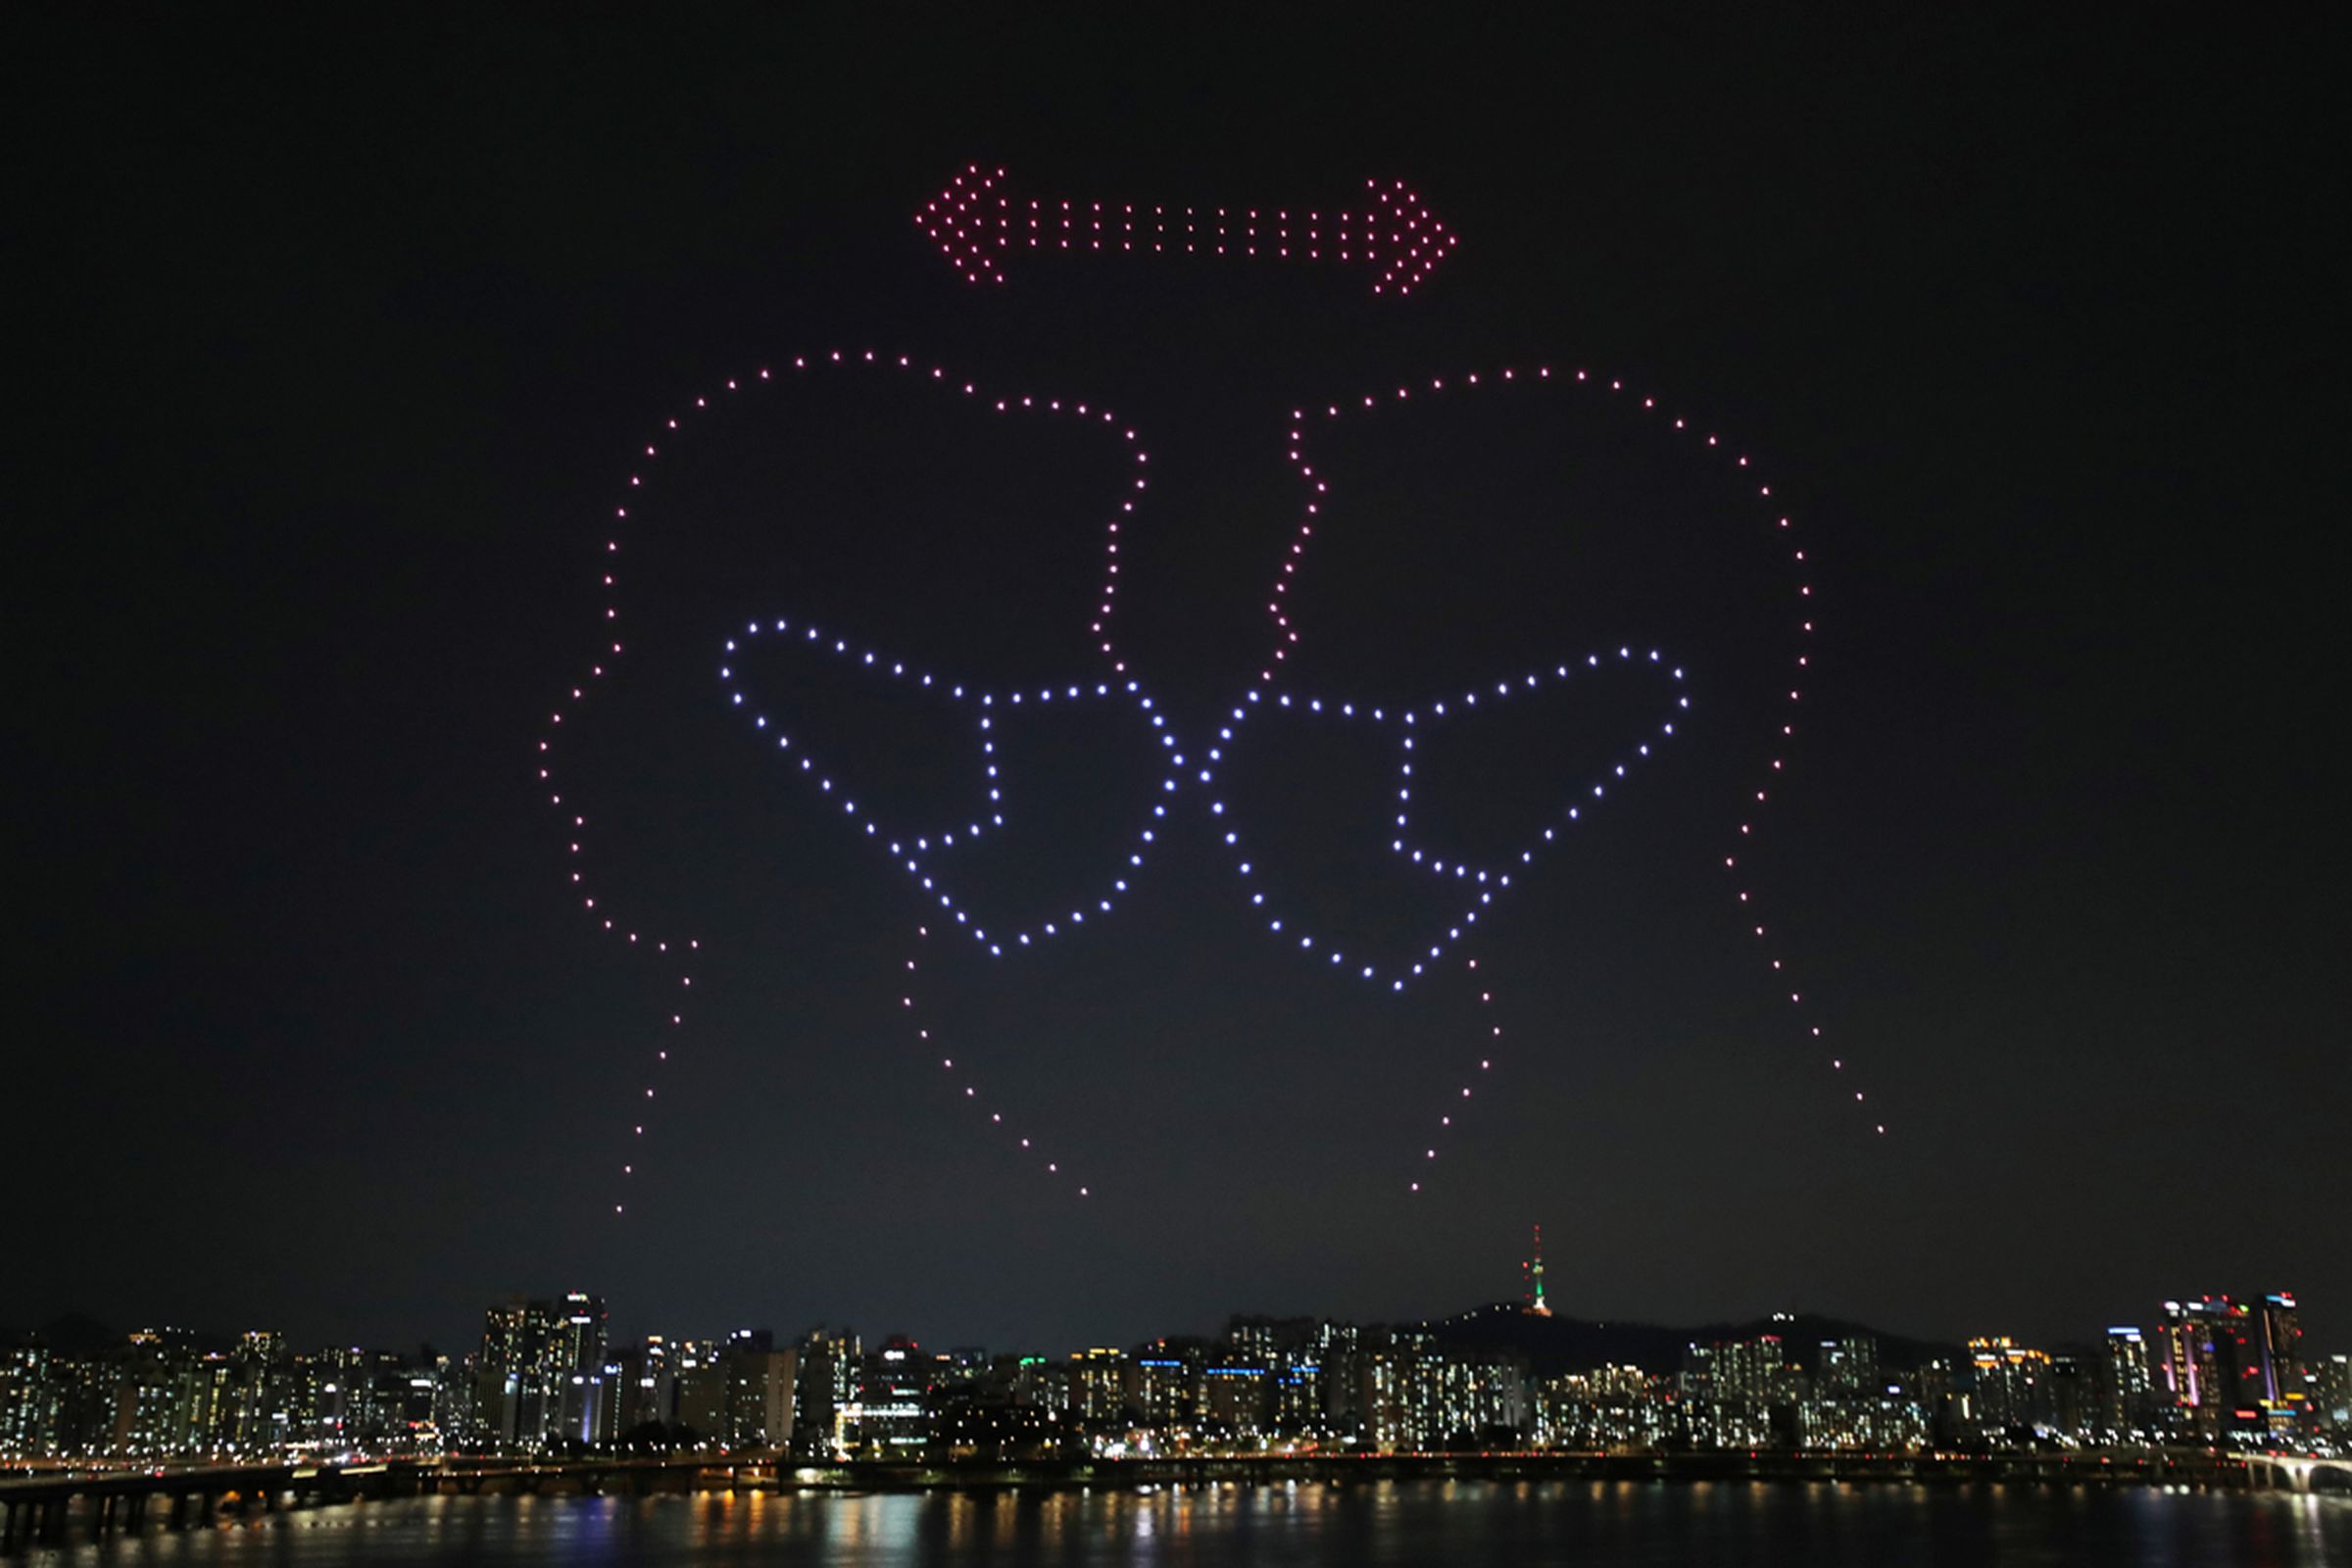 Drones remind citizens in Seoul, South Korea, to wear masks and observe social distancing guidelines.